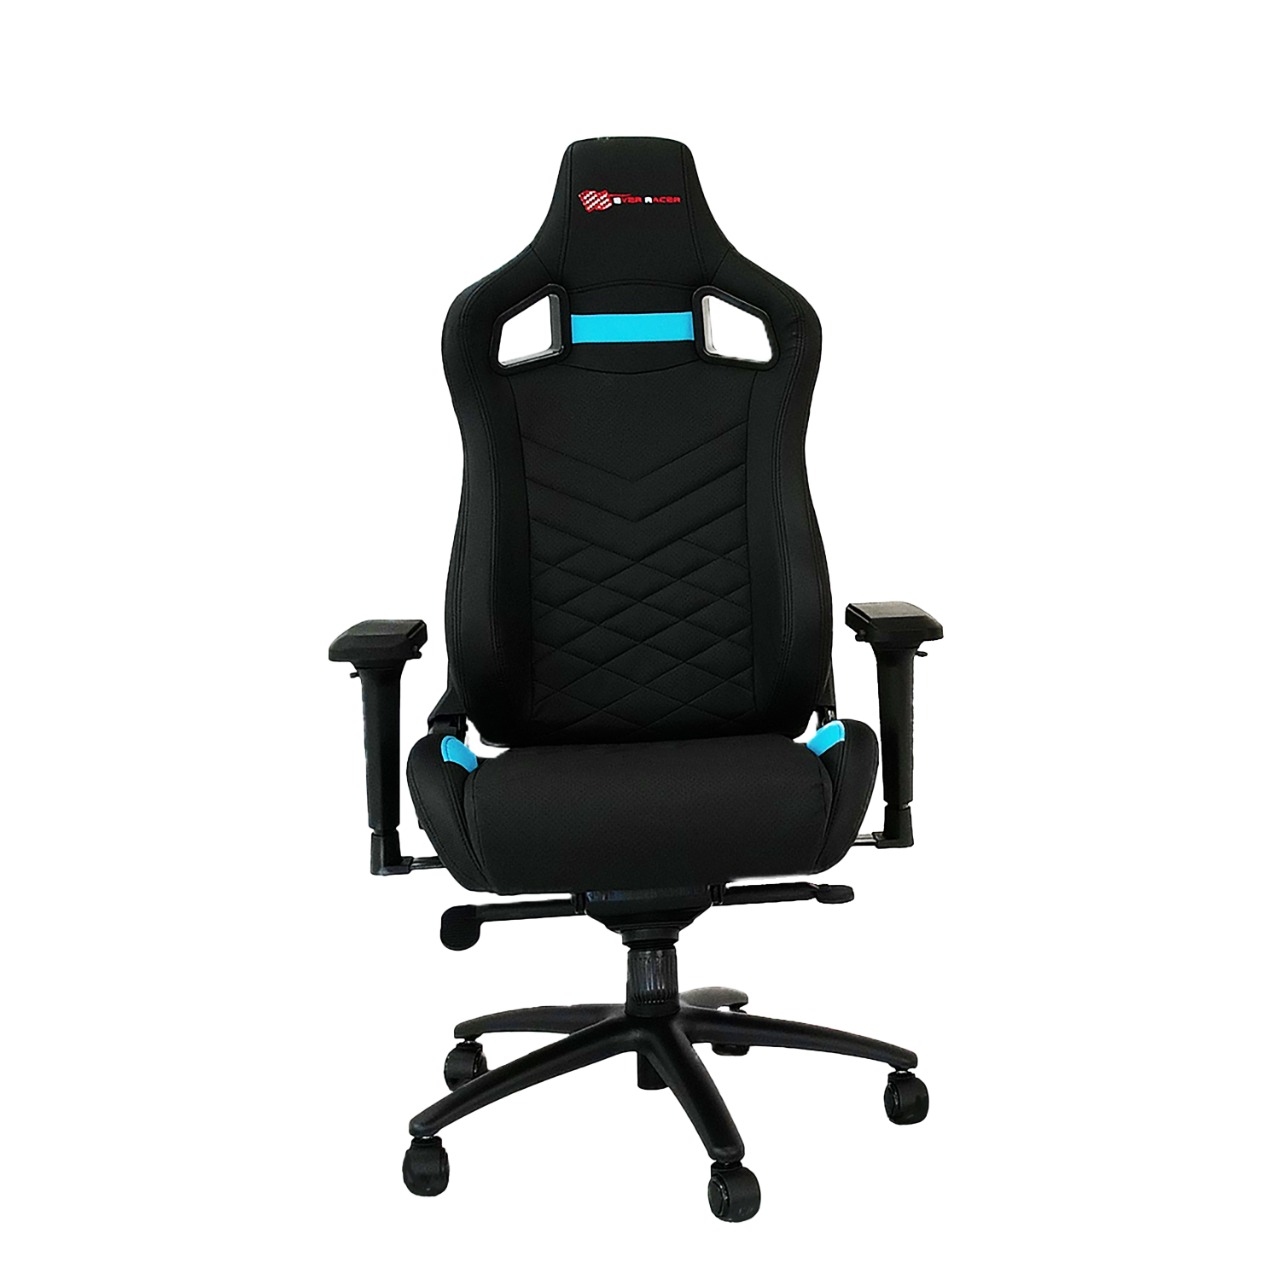 EverRacer Alpha Blue Gaming Chair